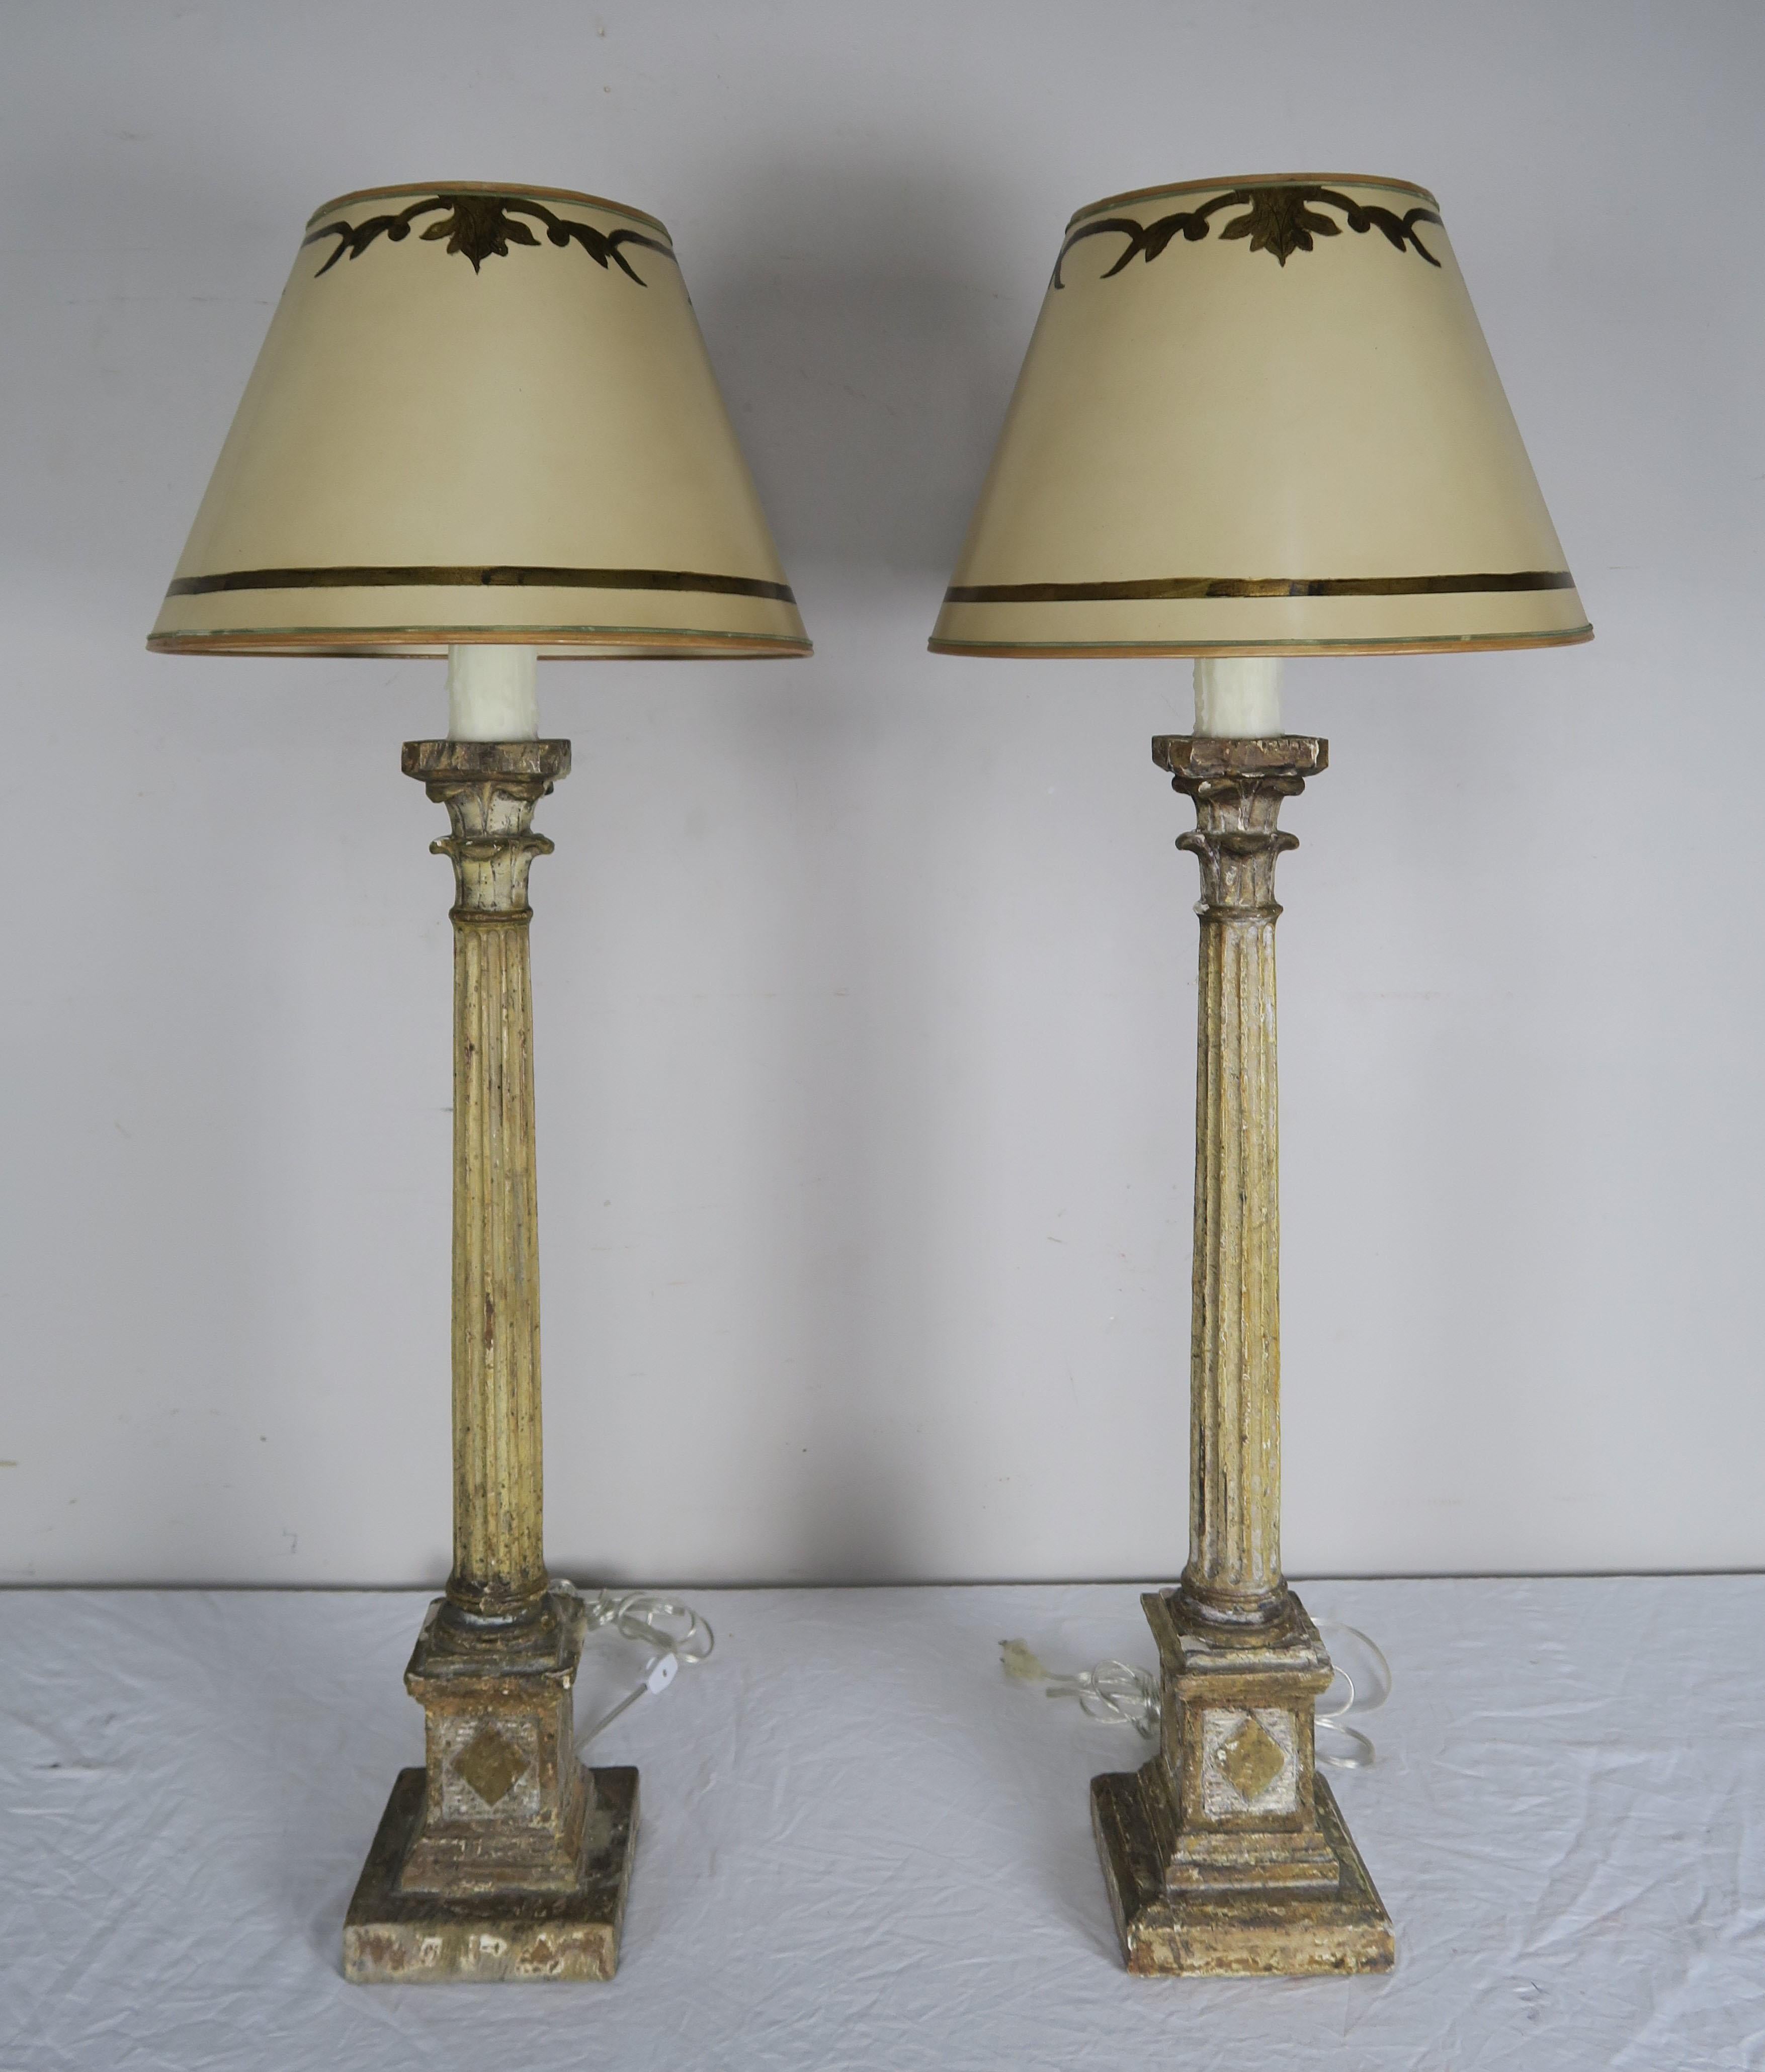 Pair of Italian Carved Neoclassical Style Lamps with Parchment Shades For Sale 5